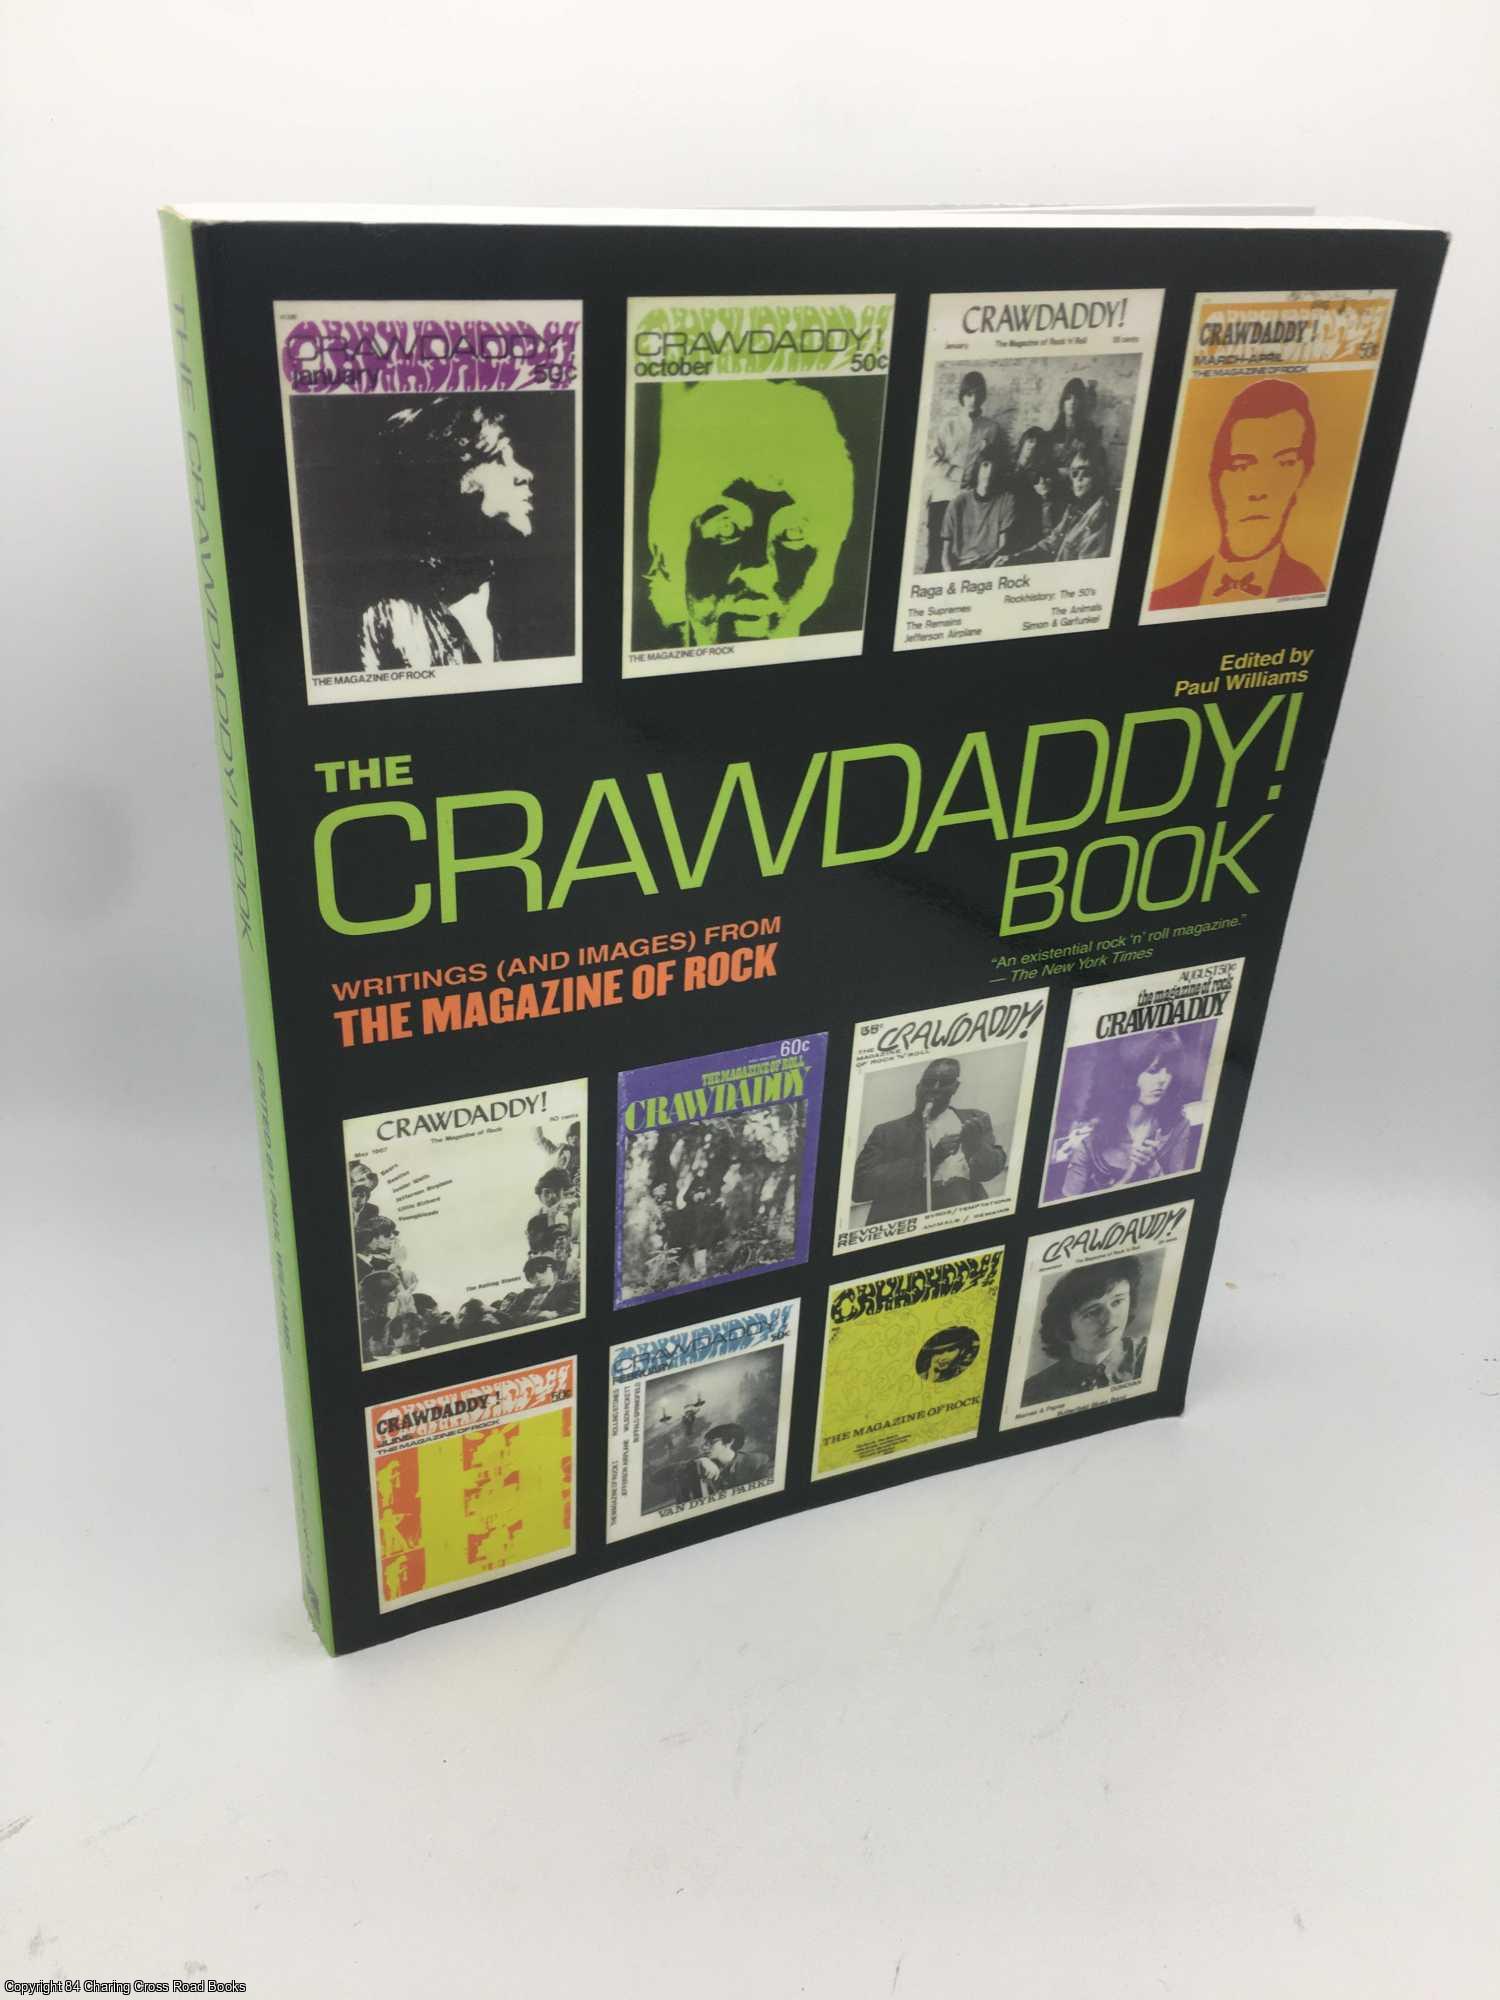 Williams, Paul - The Crawdaddy! Book: Writings  from the Magazine of Rock